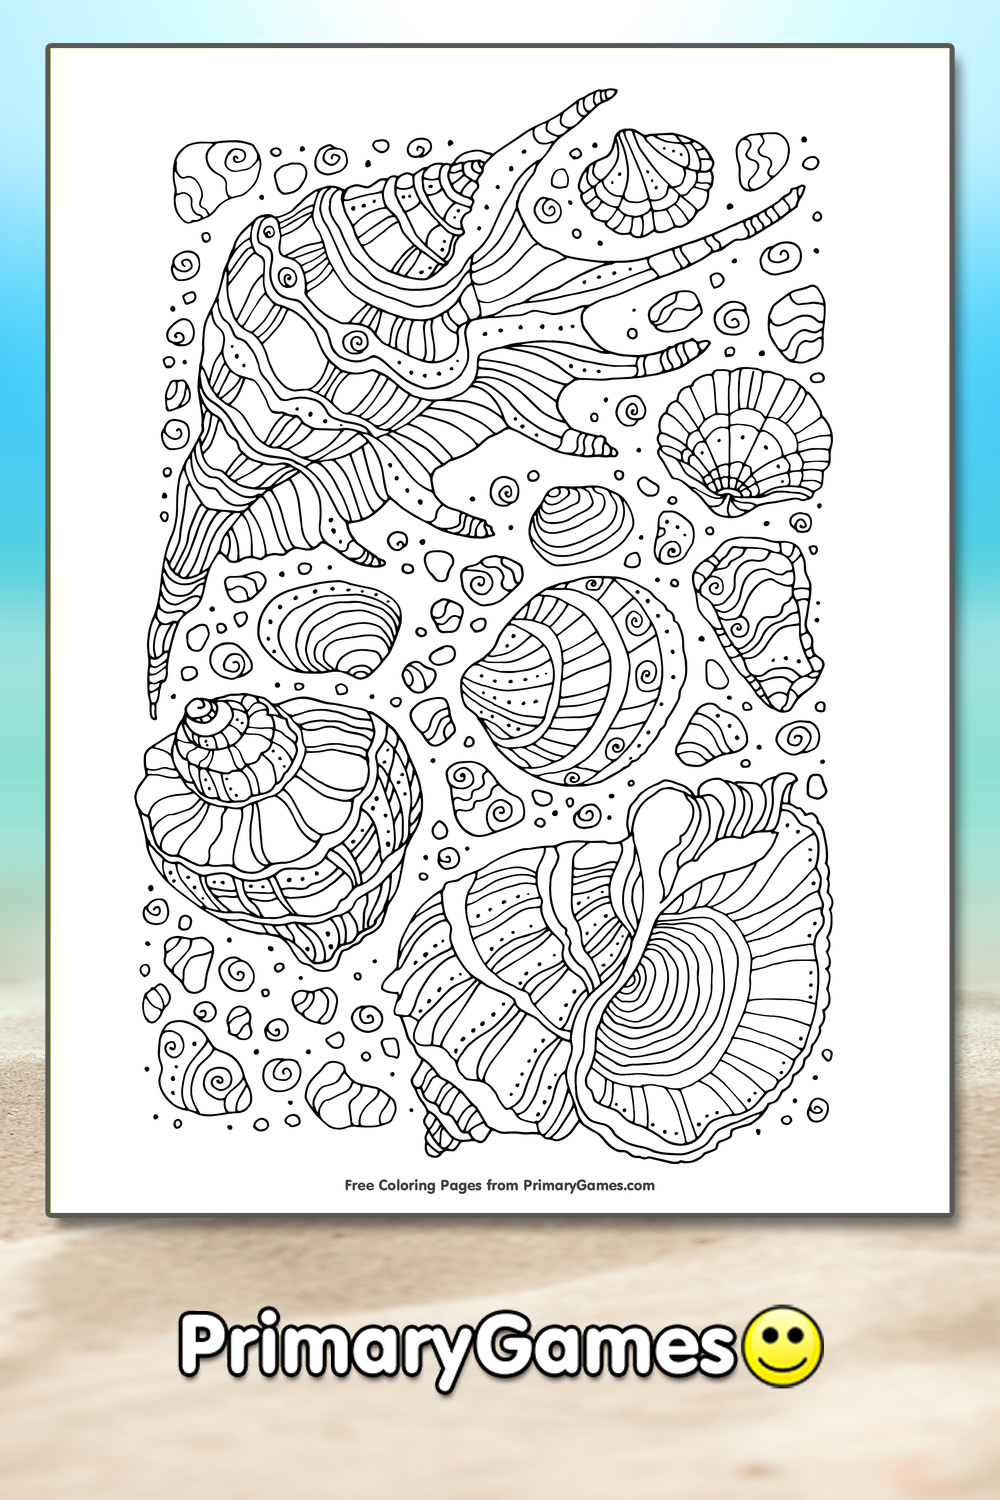 Summer sea coloring page â free printable pdf from